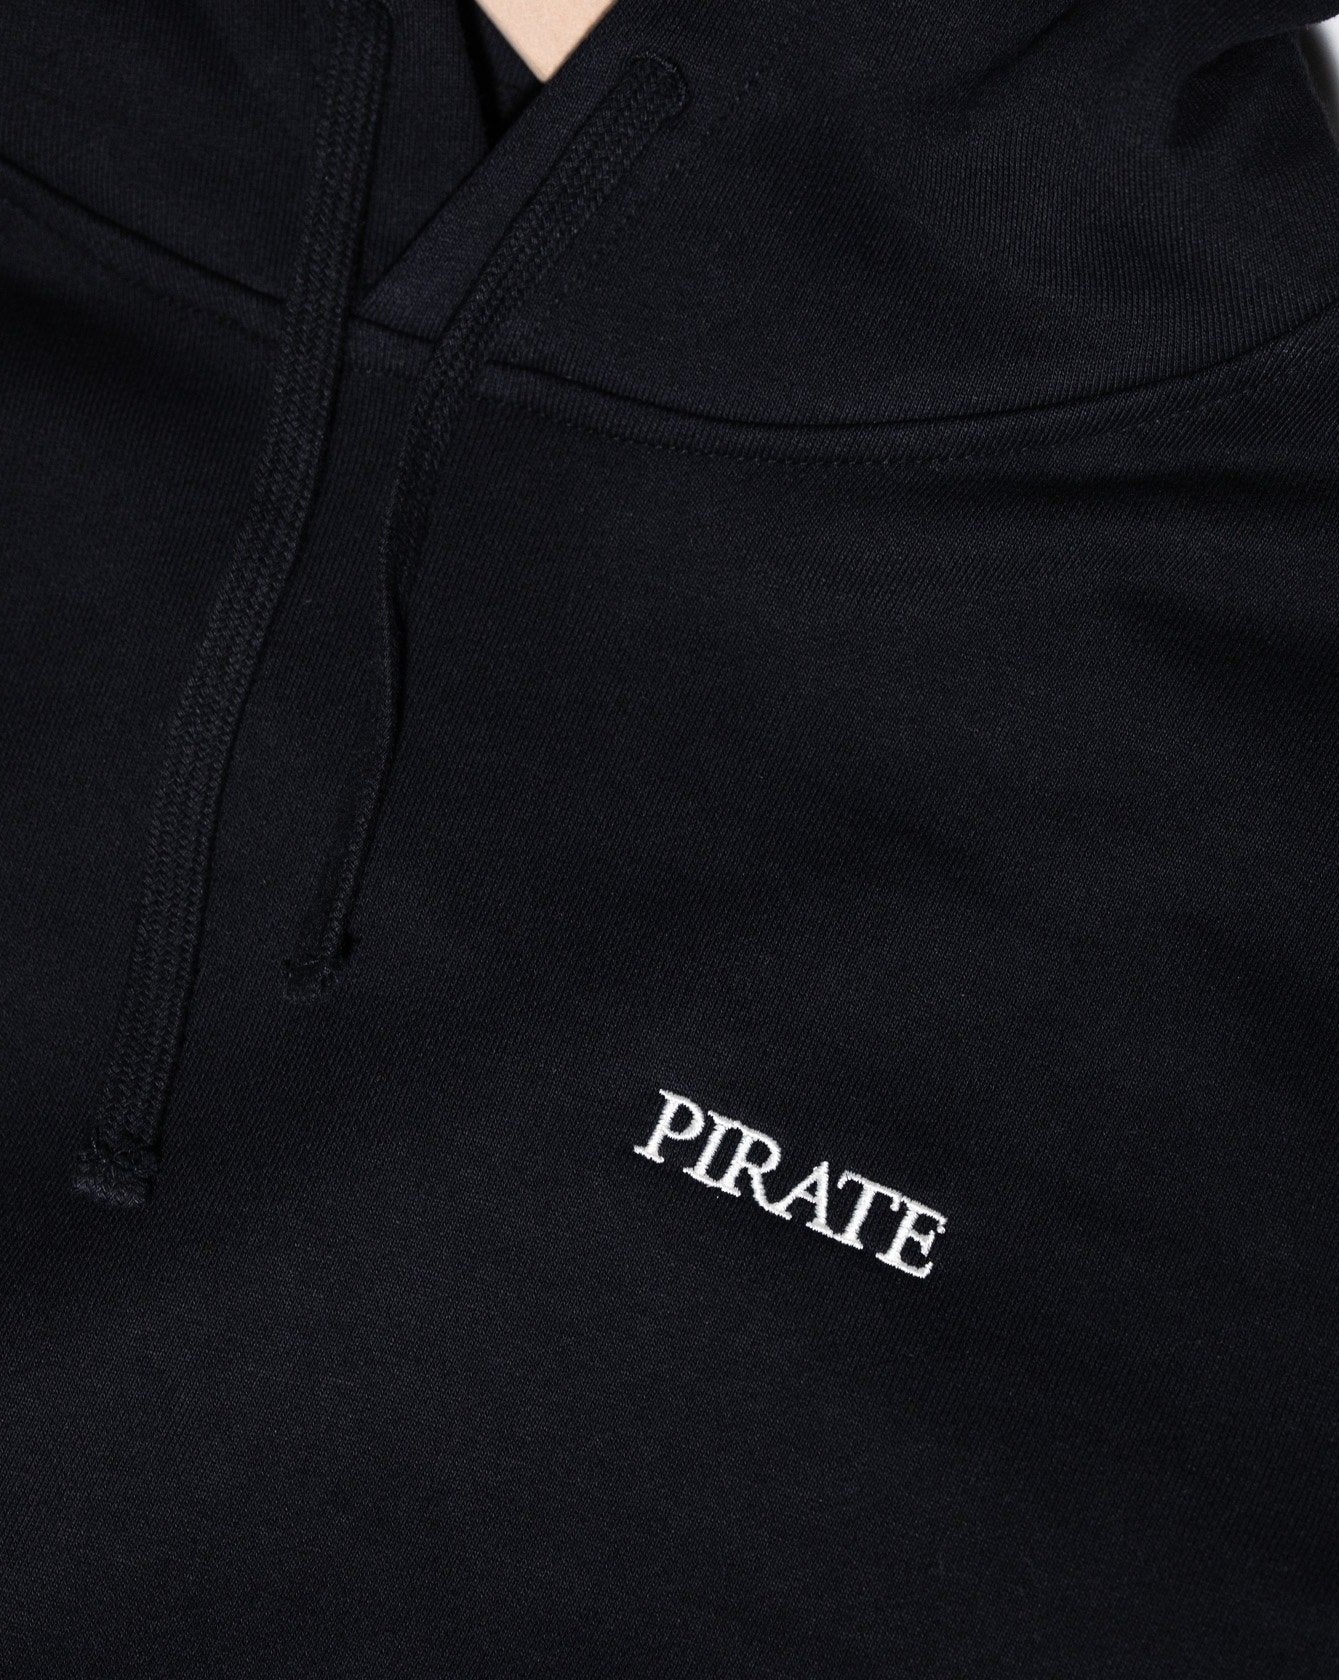 Pirate Hilltop Castles French Terry Hoodie (Midnight Black)